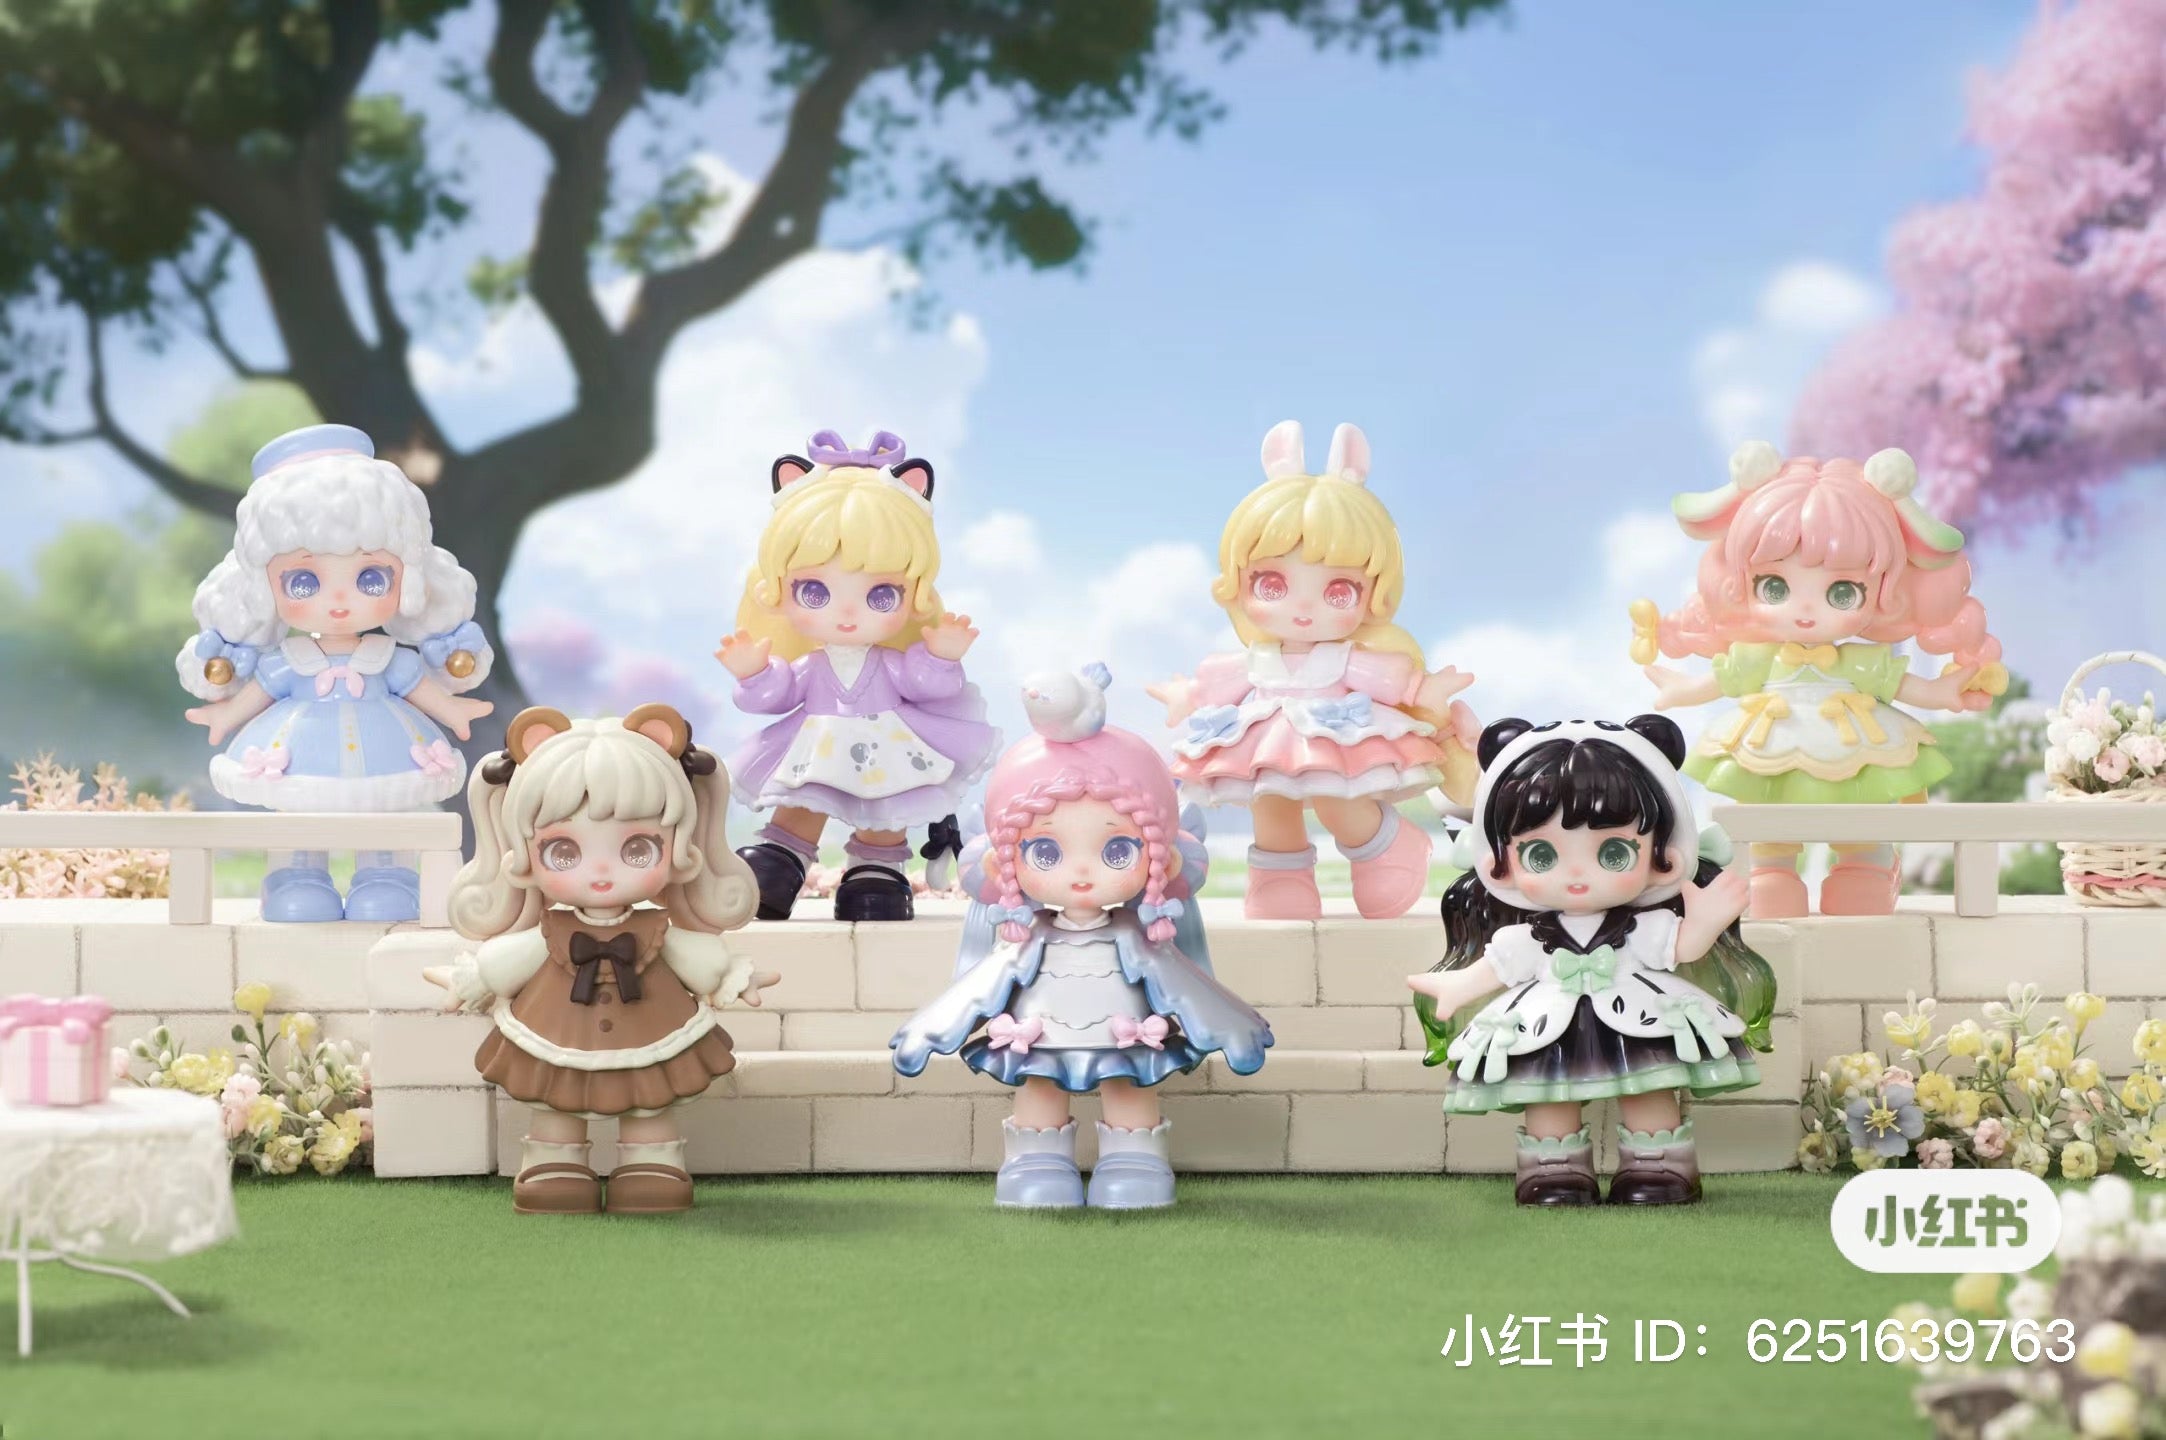 A collection of small Miana - Tea Party In The Forest Blind Box Series dolls, featuring various hair colors and outfits, displayed together.